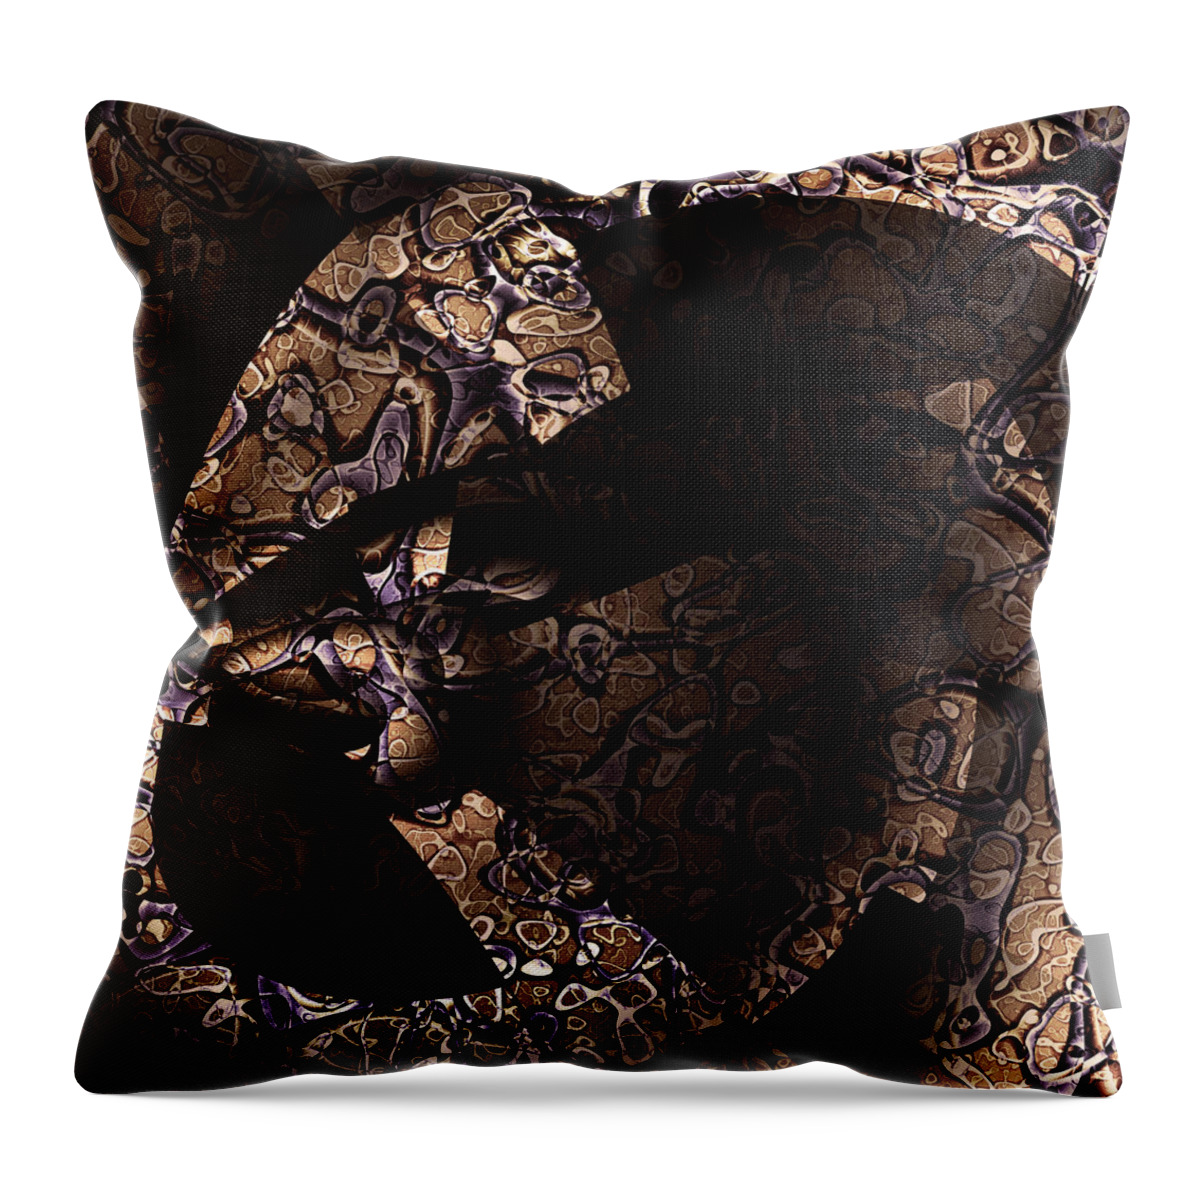 Vic Eberly Throw Pillow featuring the digital art Outside In by Vic Eberly